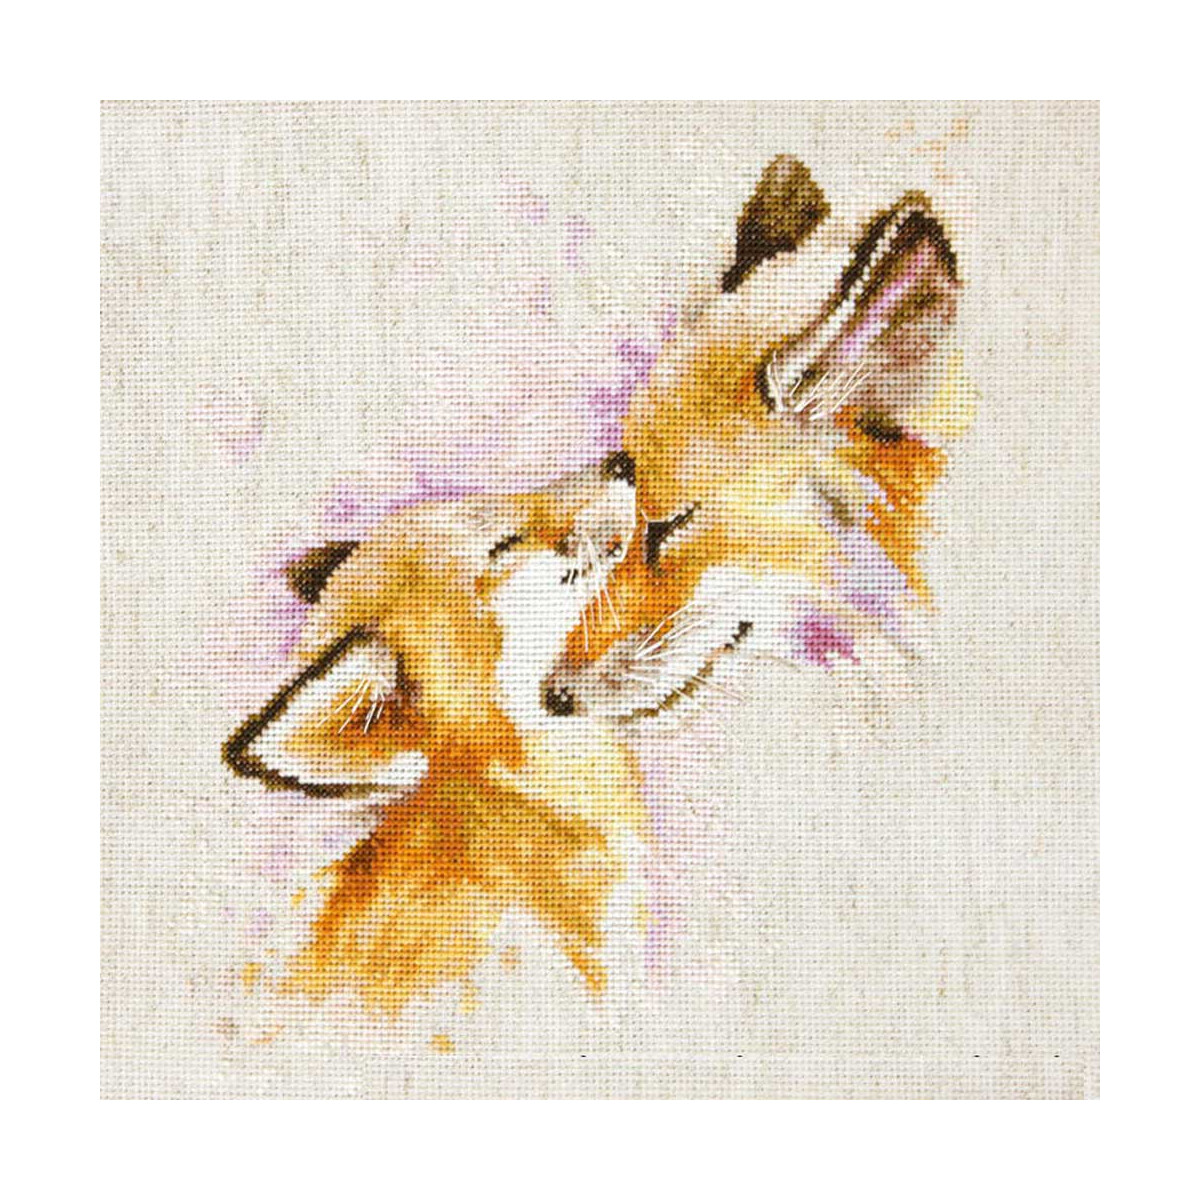 A cross-stitch embroidery shows two foxes cuddling...